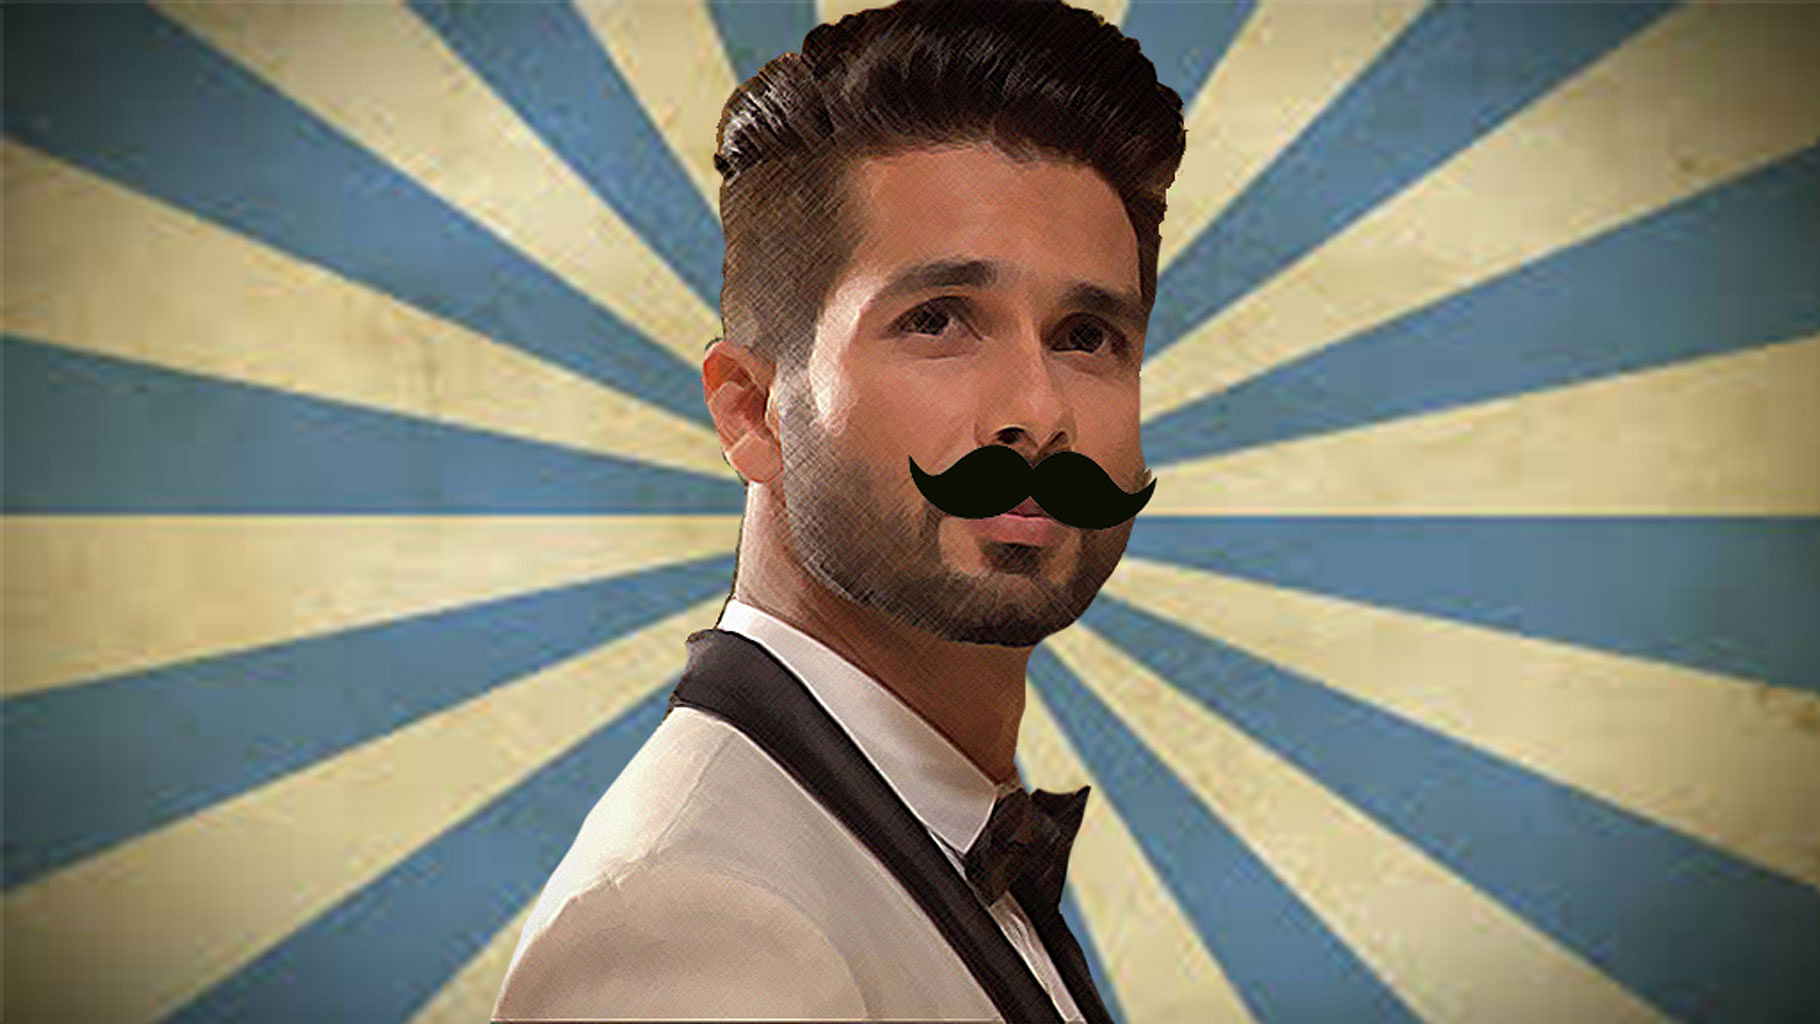 The many avatars of Shahid Kapoor (Photo: Instagram/ShahidKapoor, altered by The Quint)